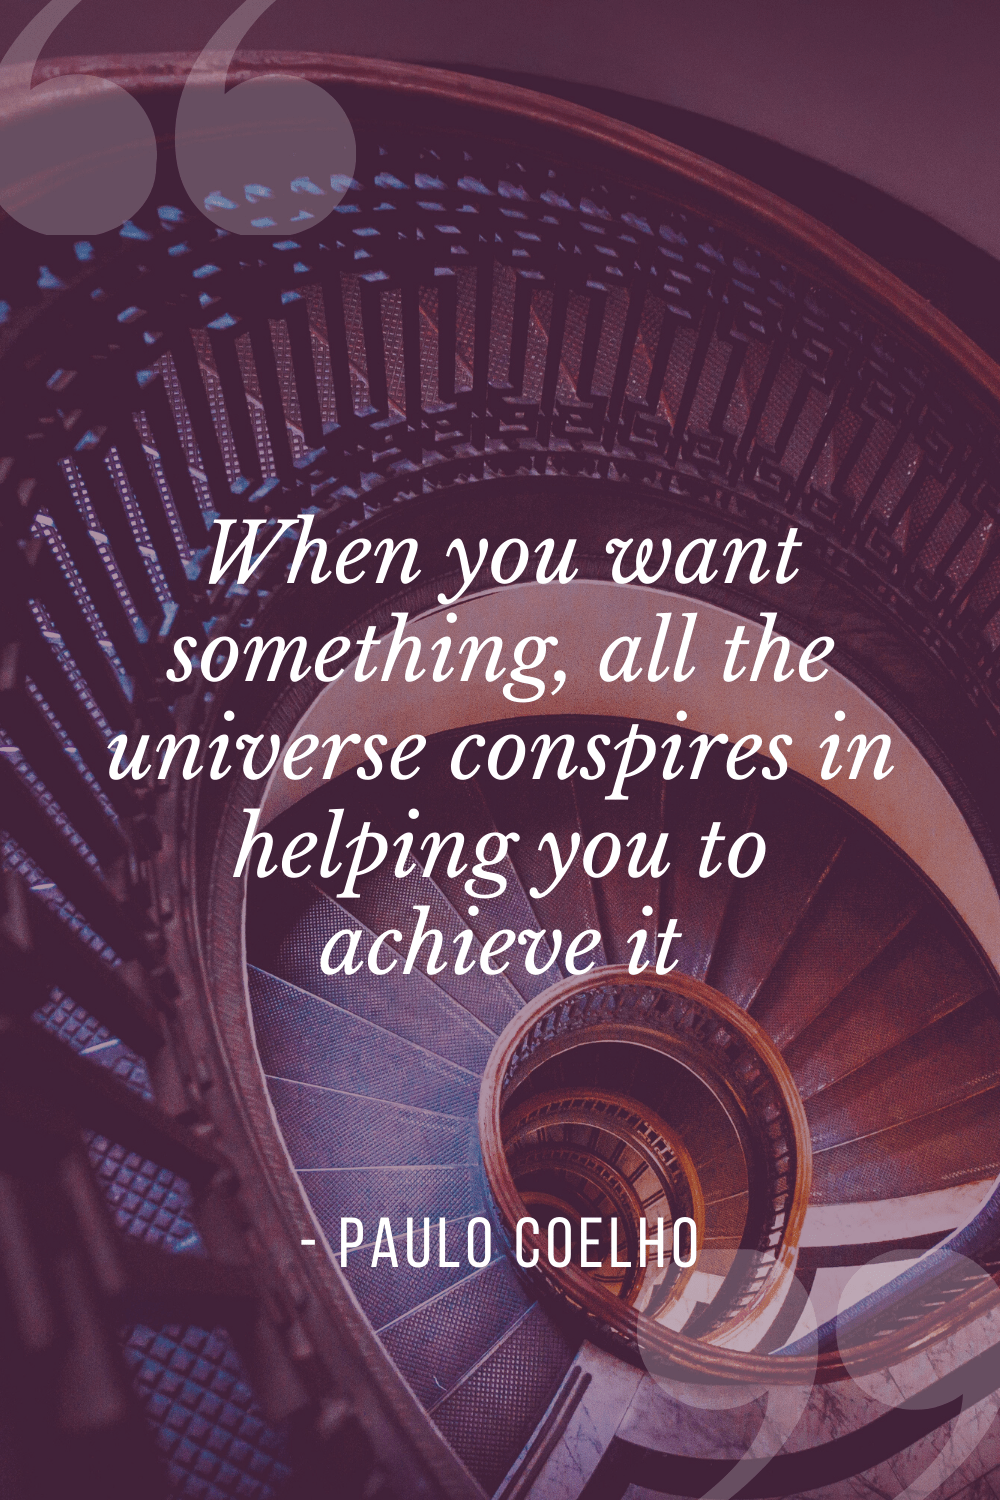 “When you want something, all the universe conspires in helping you to achieve it”, Paulo Coelho